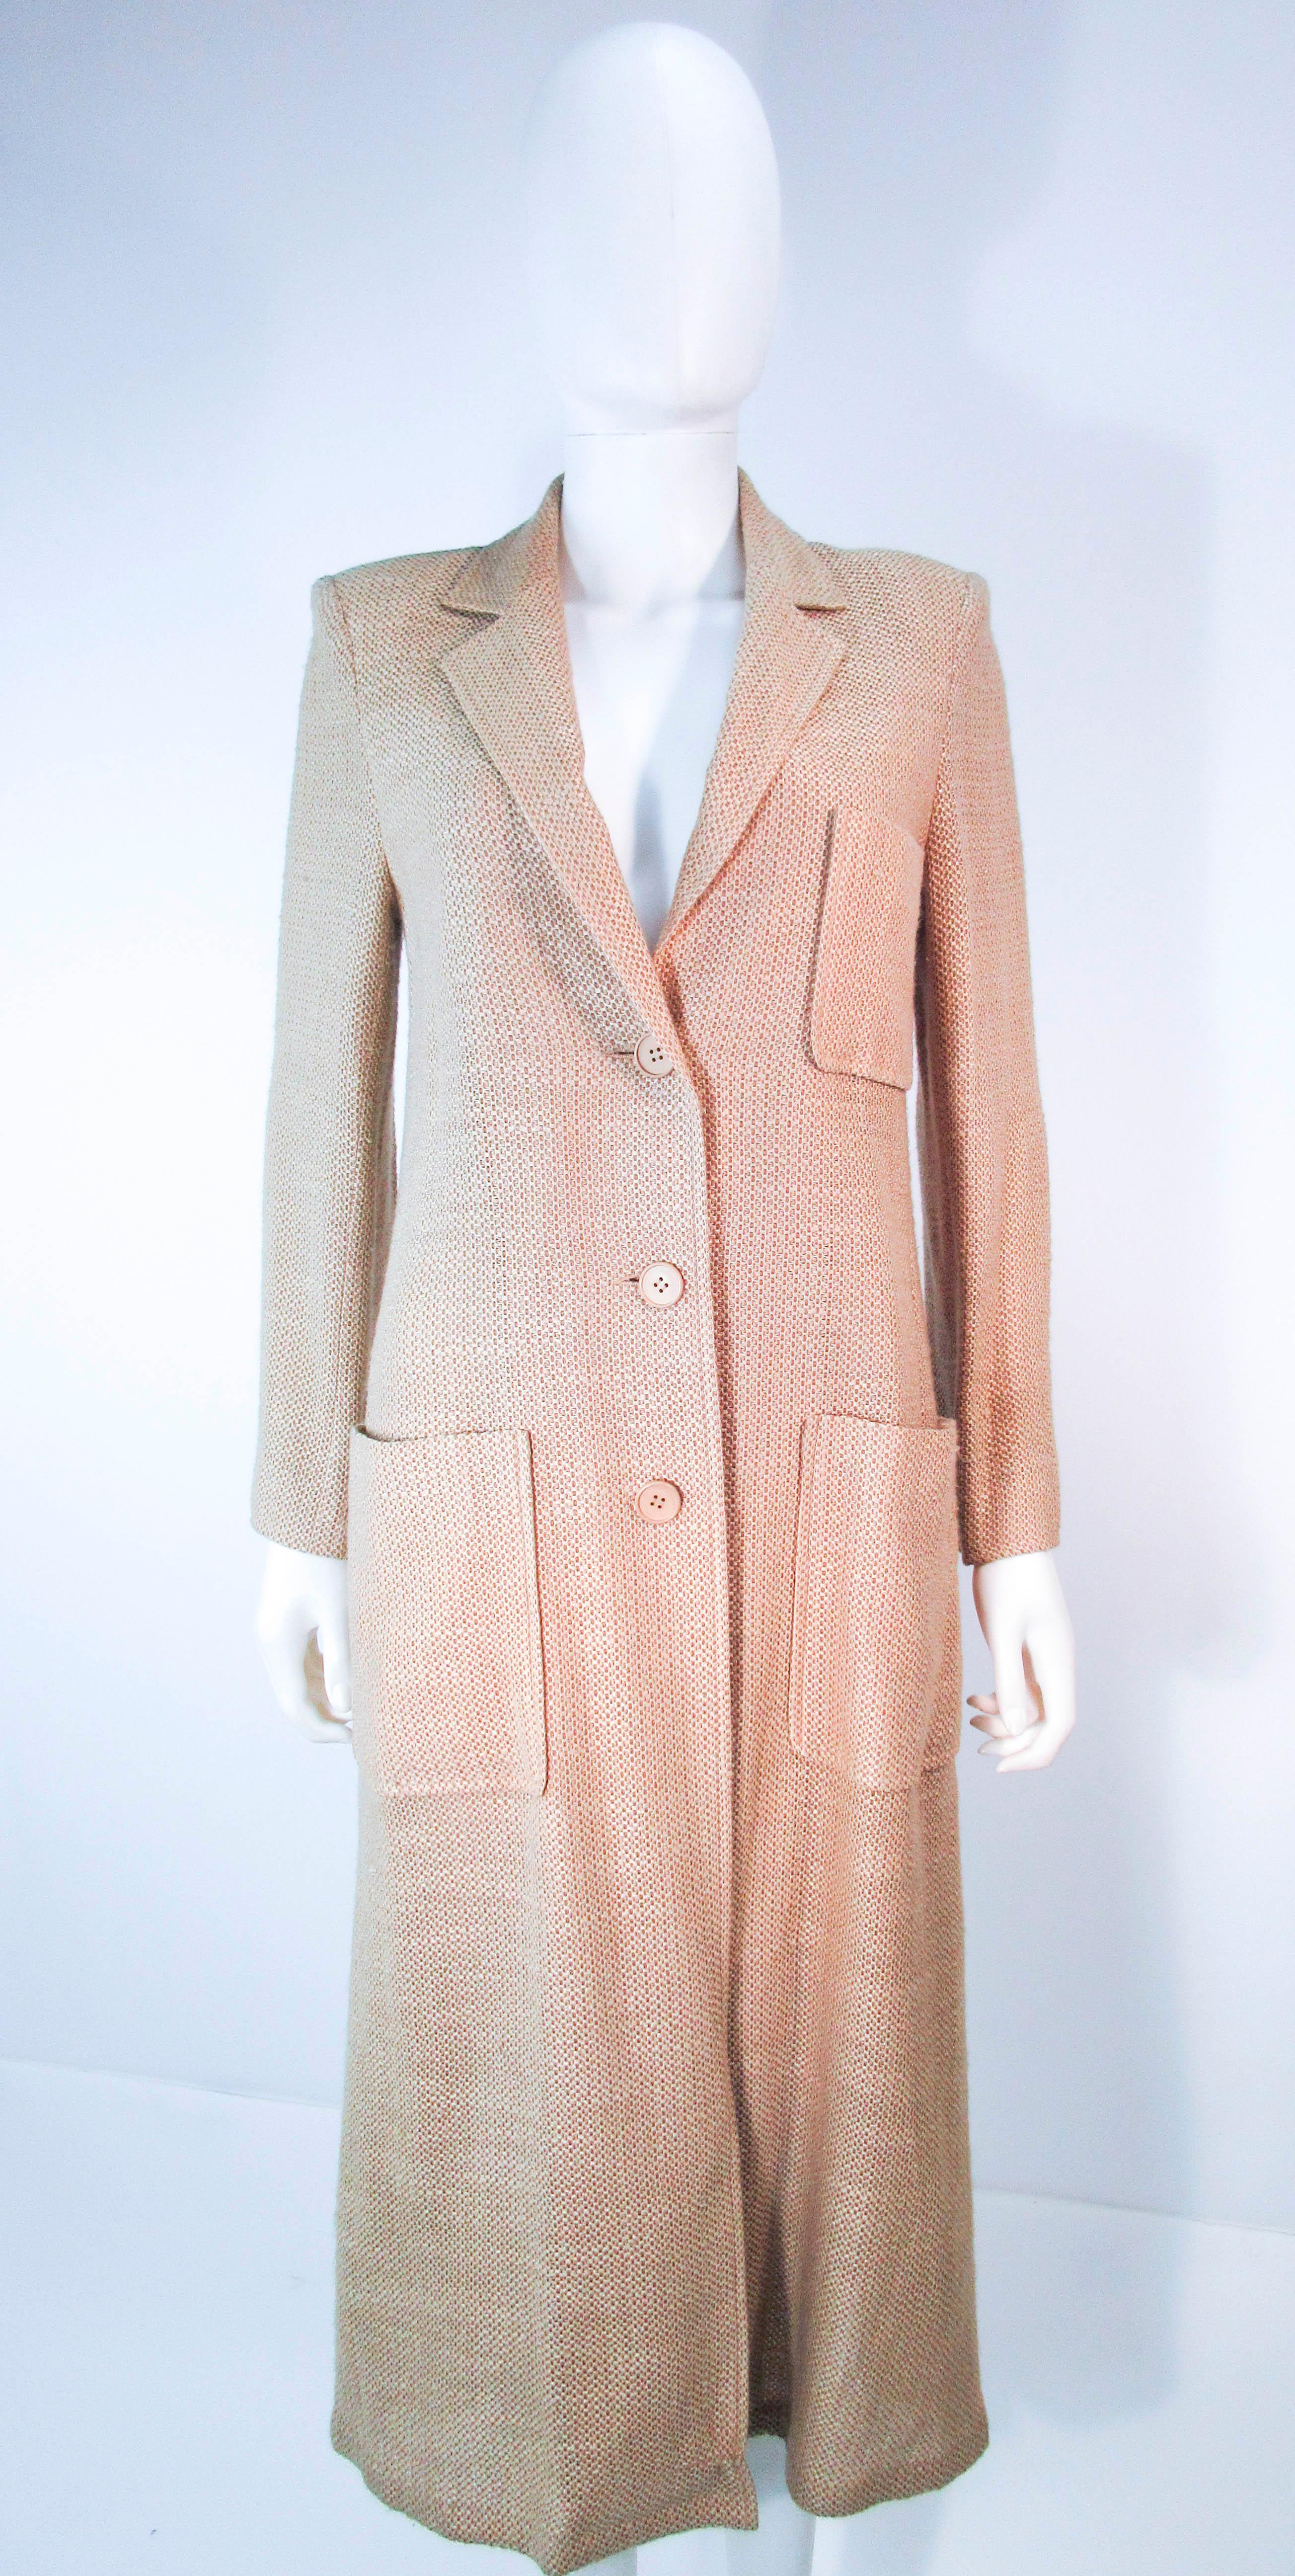 This Valentino is a wonderful design composed of light weight natural fiber in beige & nude. Features center front button closures and pockets. In excellent vintage condition (some signs of wear due to age). 

**Please cross-reference measurements